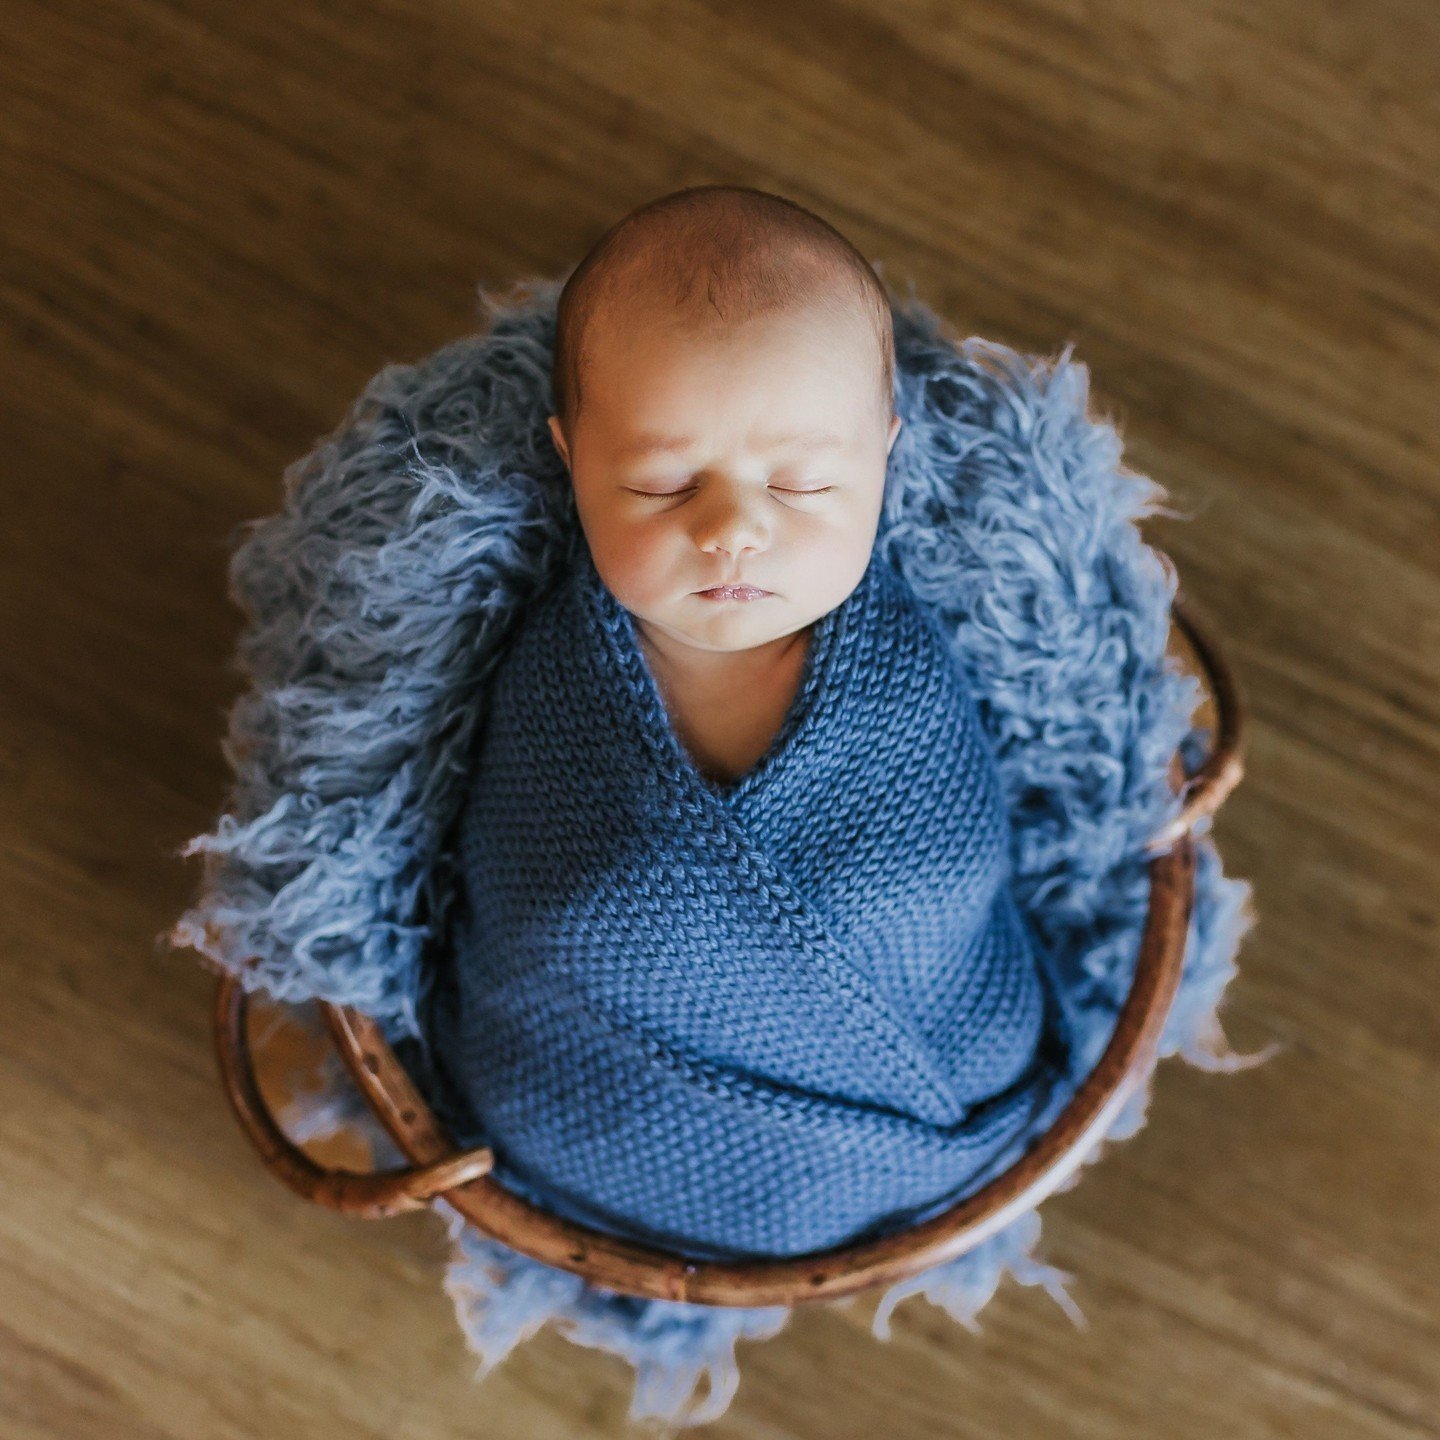 For all the mamas out there wondering if you must skip newborn photos and wait a bit more because I understand the newborn stage is vulnerable and a bit chaotic, my honest answer is NO! ⁠
⁠
Of course, I would be happy to work with you wherever you de